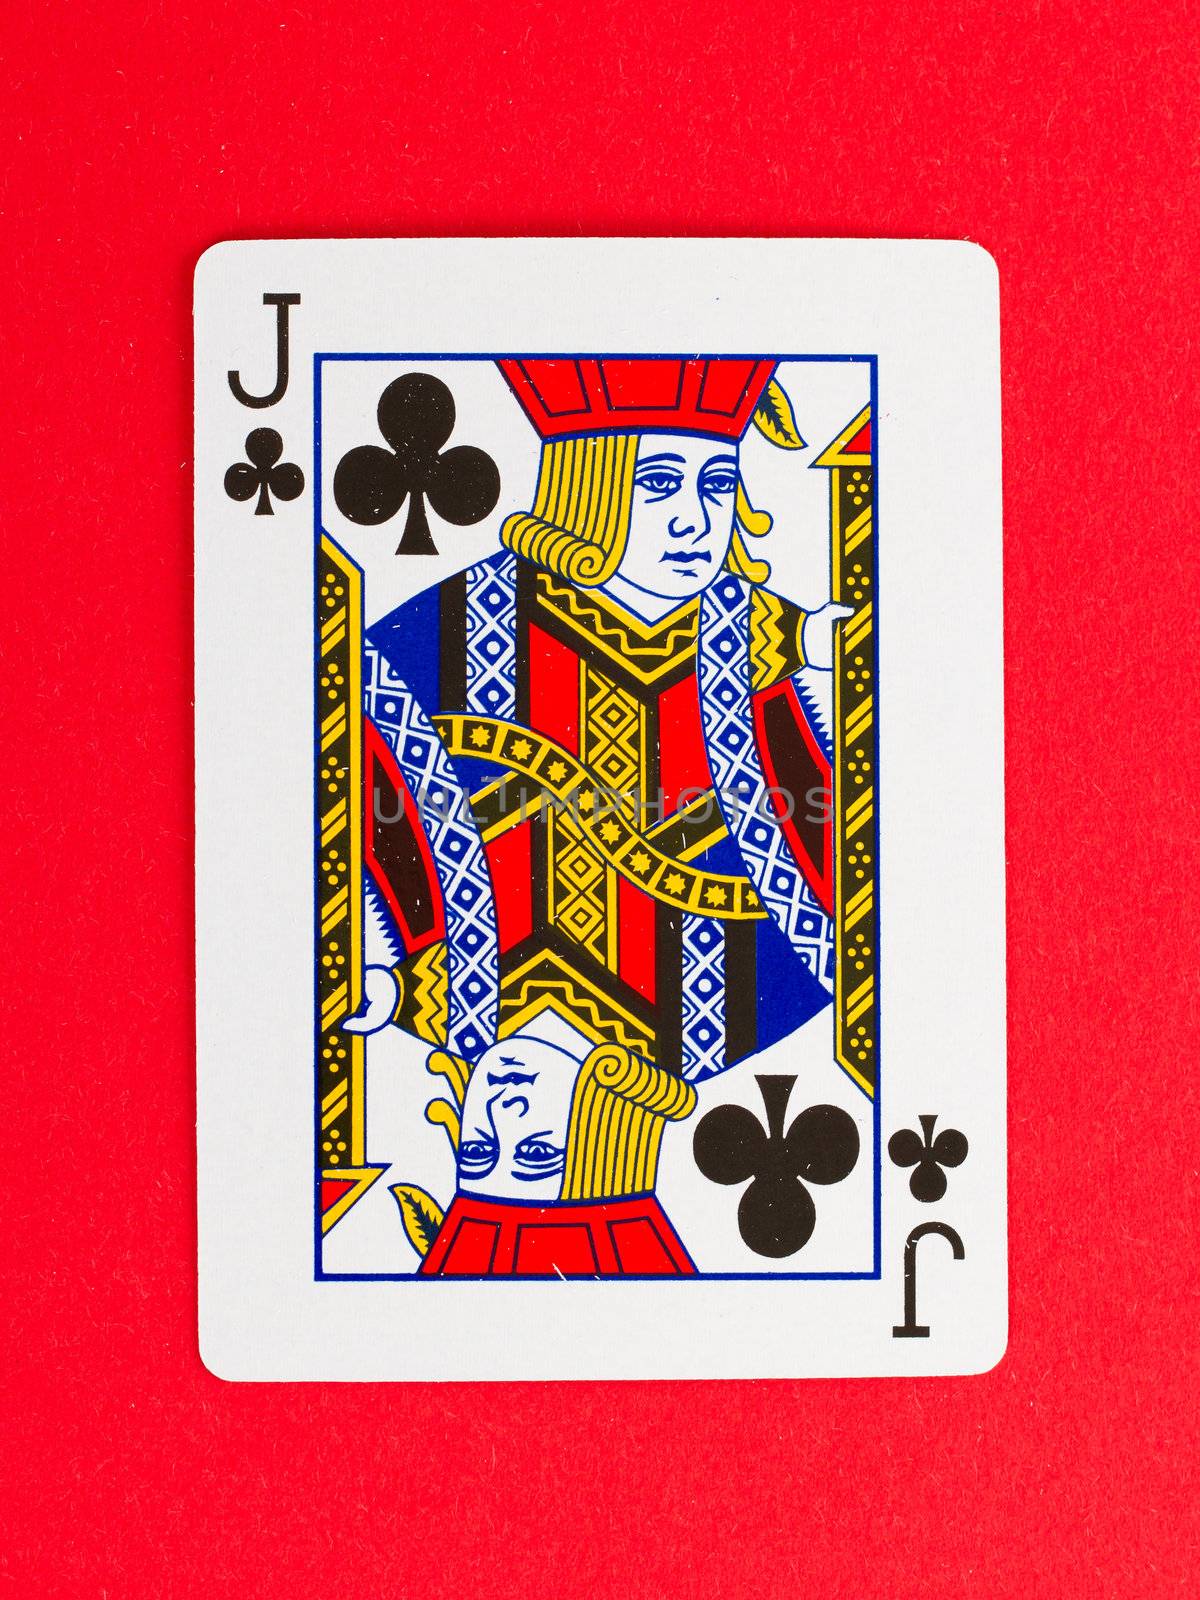 Old playing card (jack) isolated on a red background